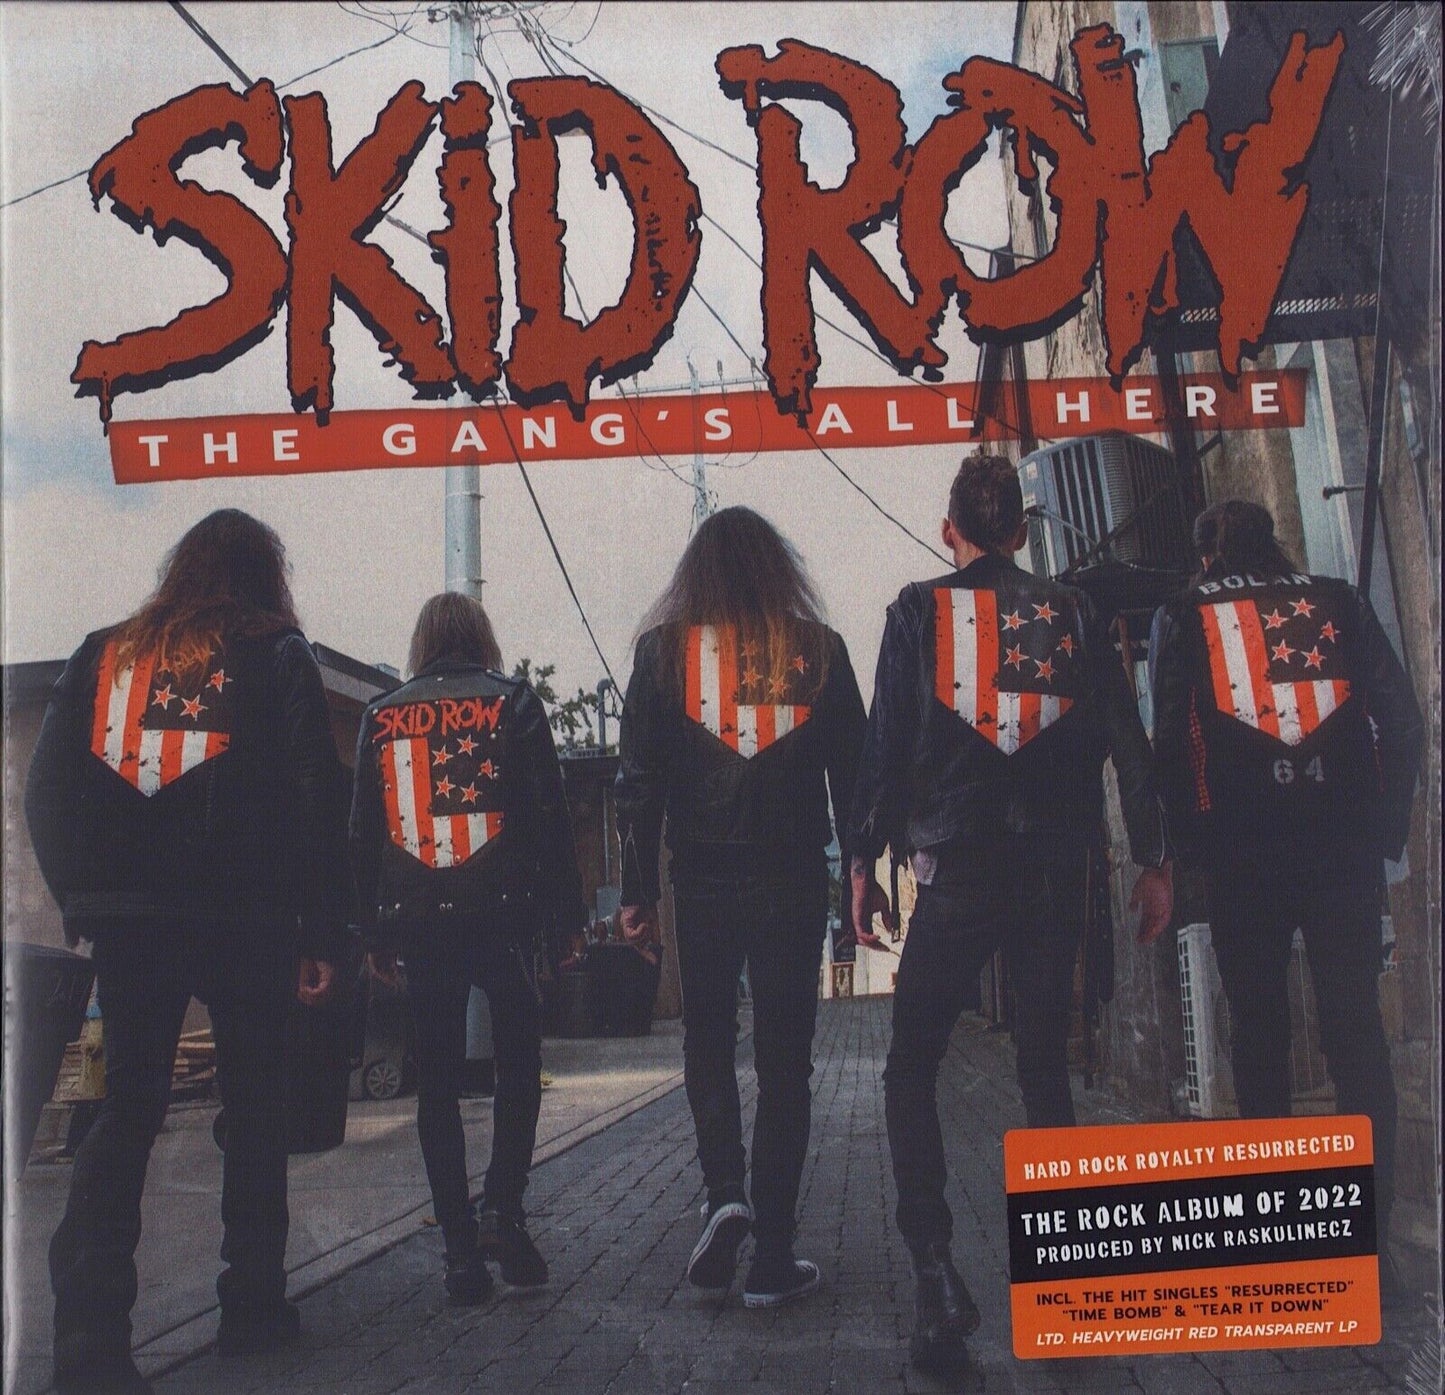 Skid Row ‎- The Gang's All Here Red Transparent Vinyl LP Limited Edition